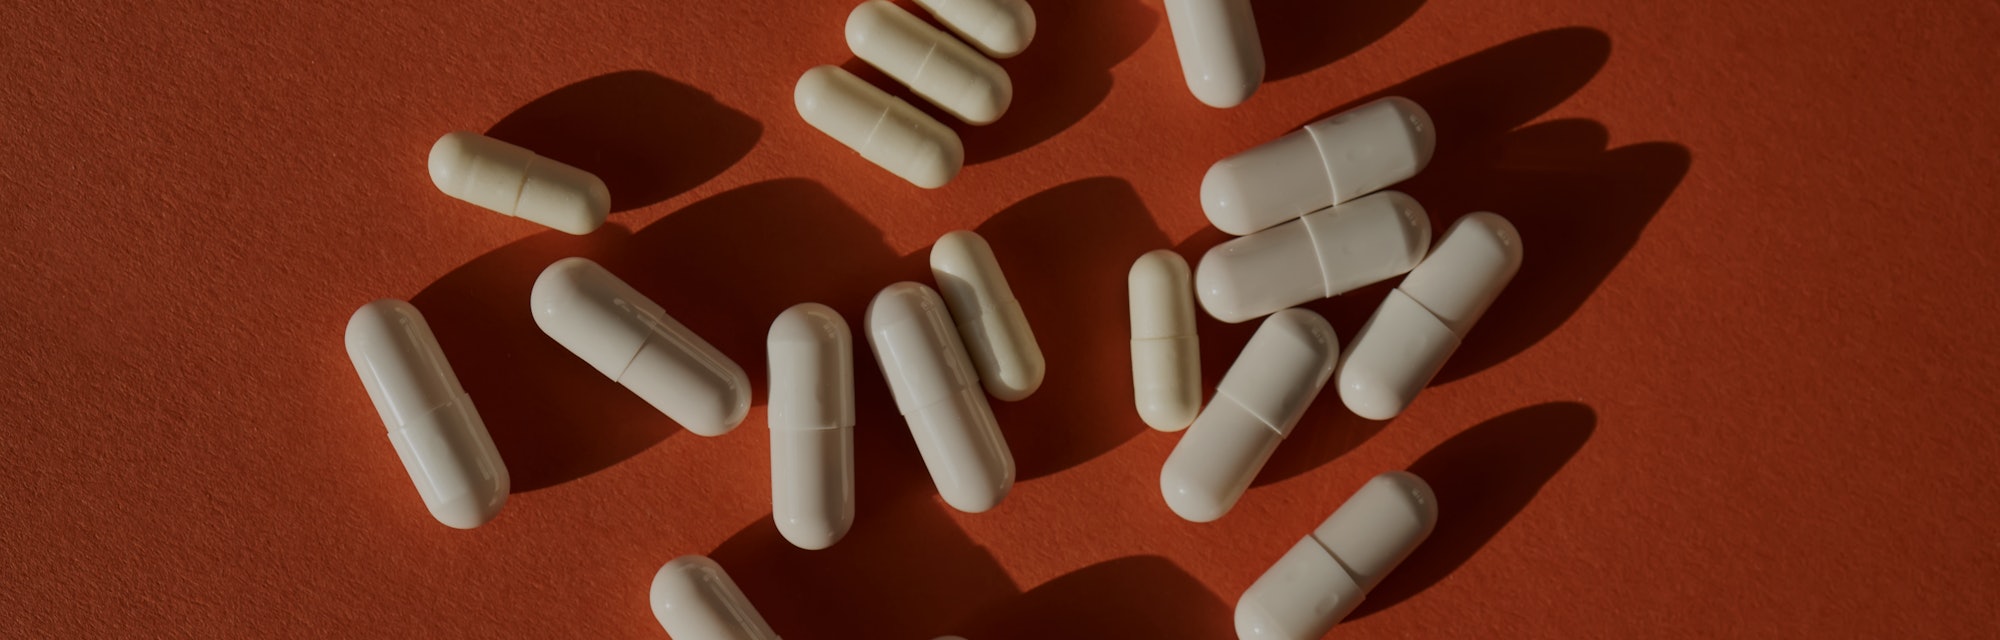 Medicinal capsules on a terracotta background.